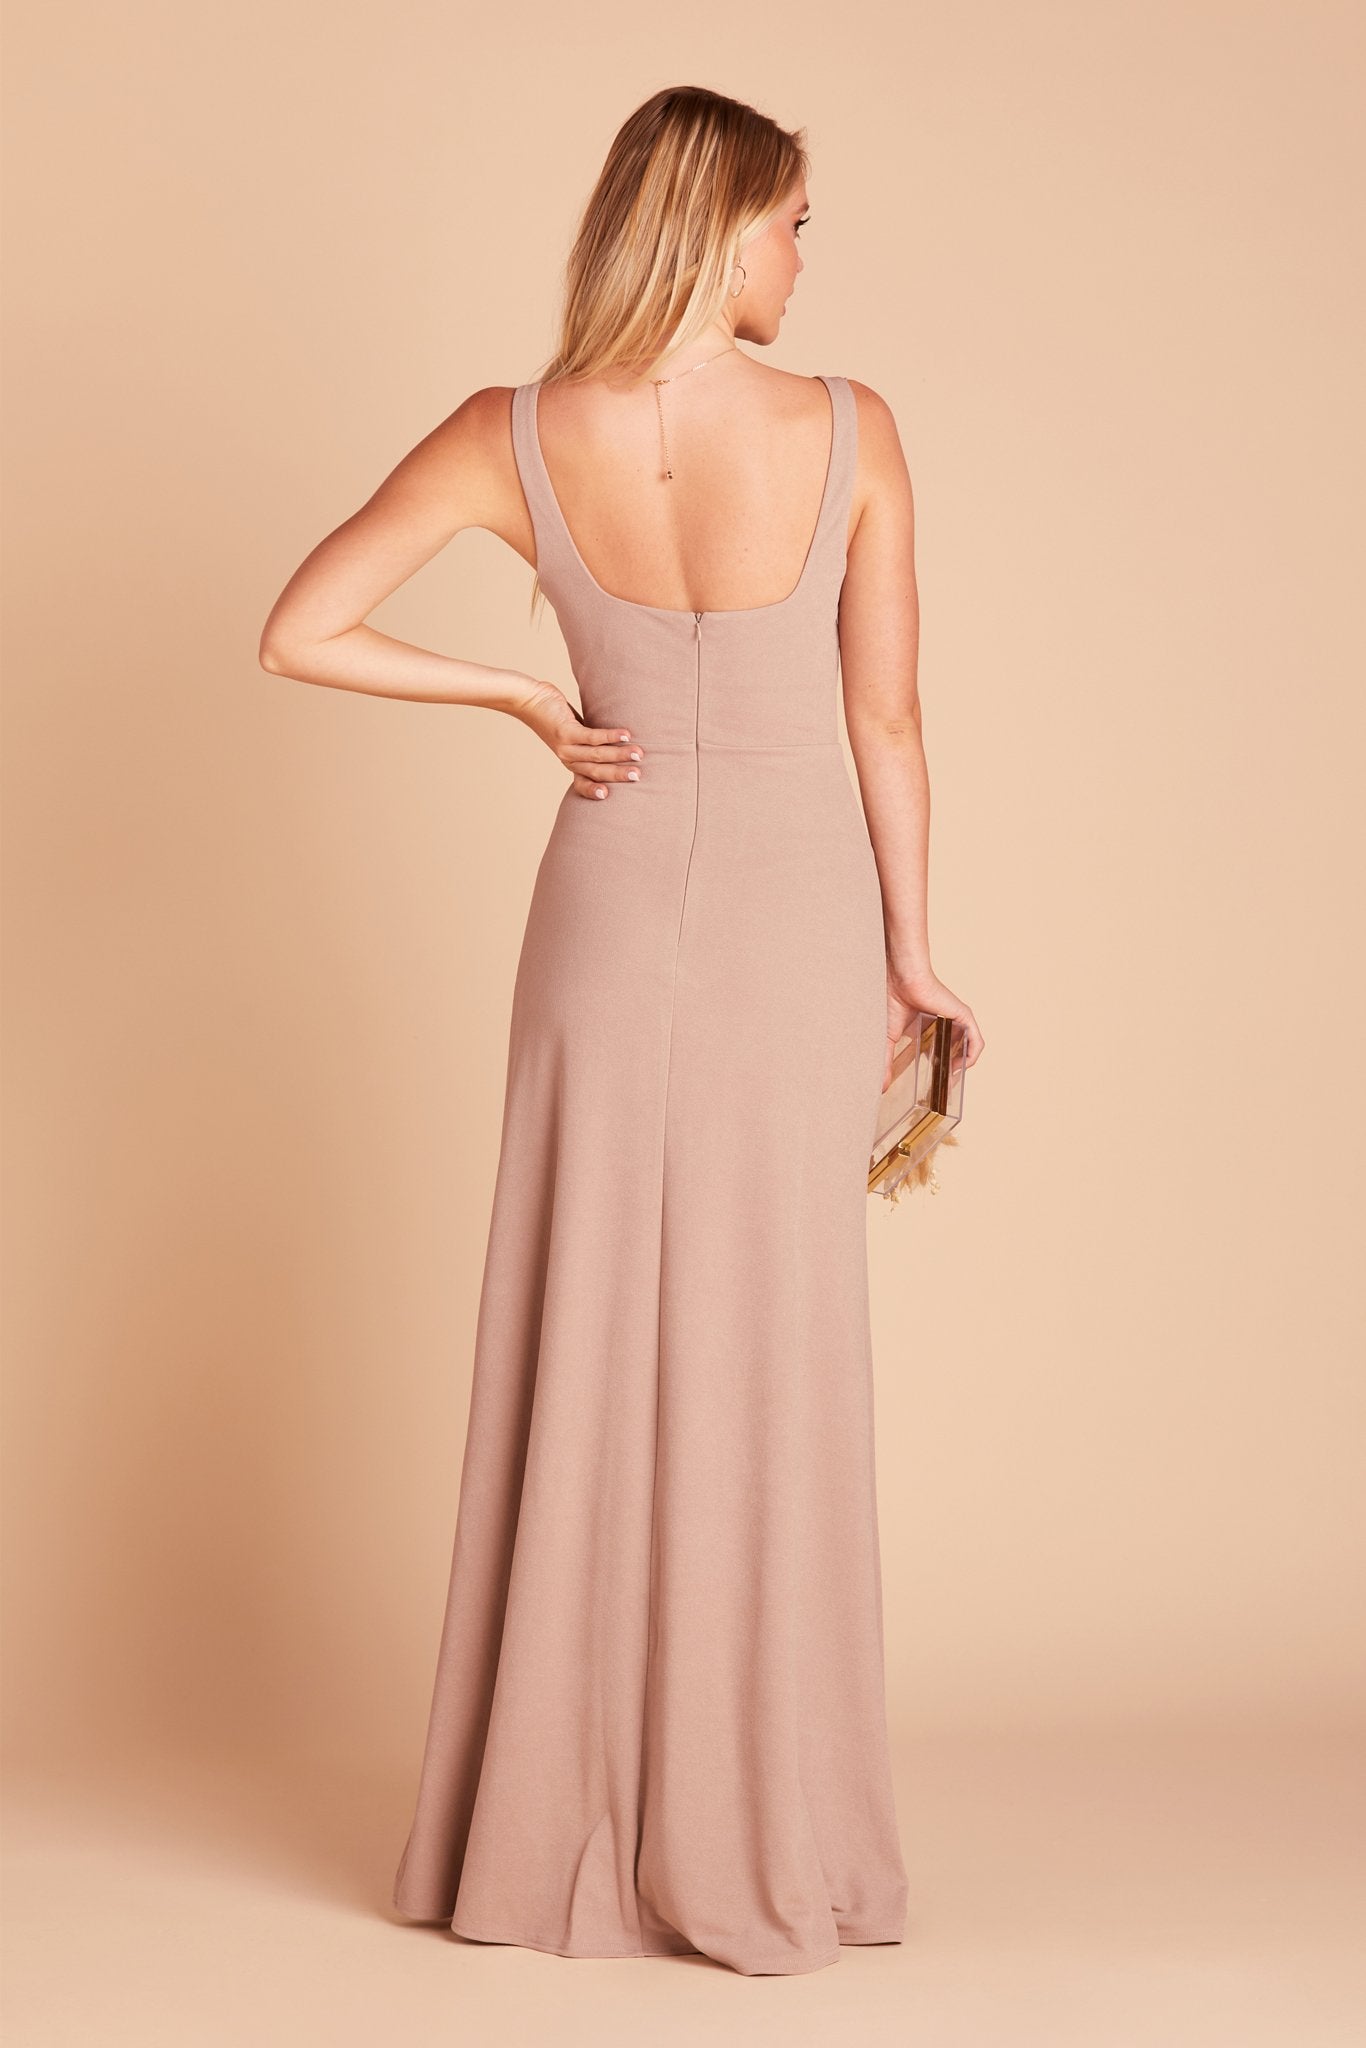 Back view of the Alex Convertible Bridesmaid Dress in taupe shows that the shoulder ties feature a square cut that falls just below the shoulder blades.